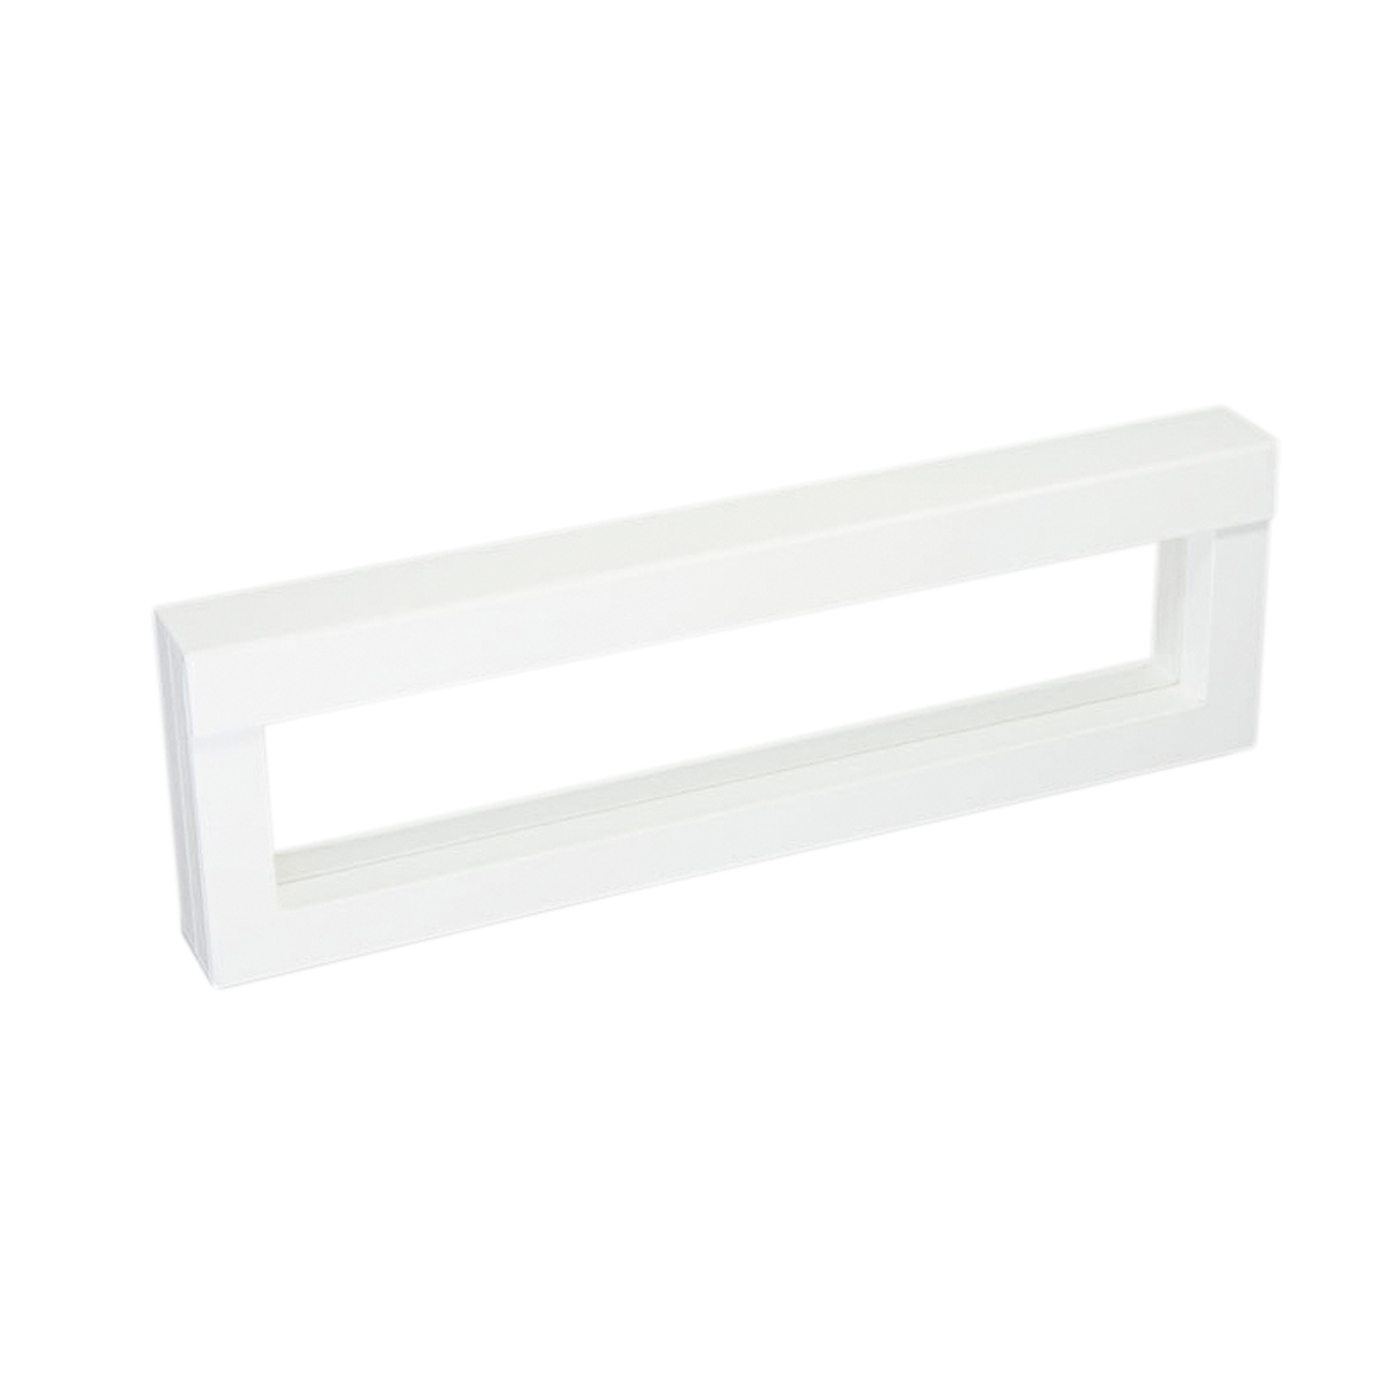 Jewellery Packaging "Frame", White, 265 x 60 x 25 mm - 1 piece